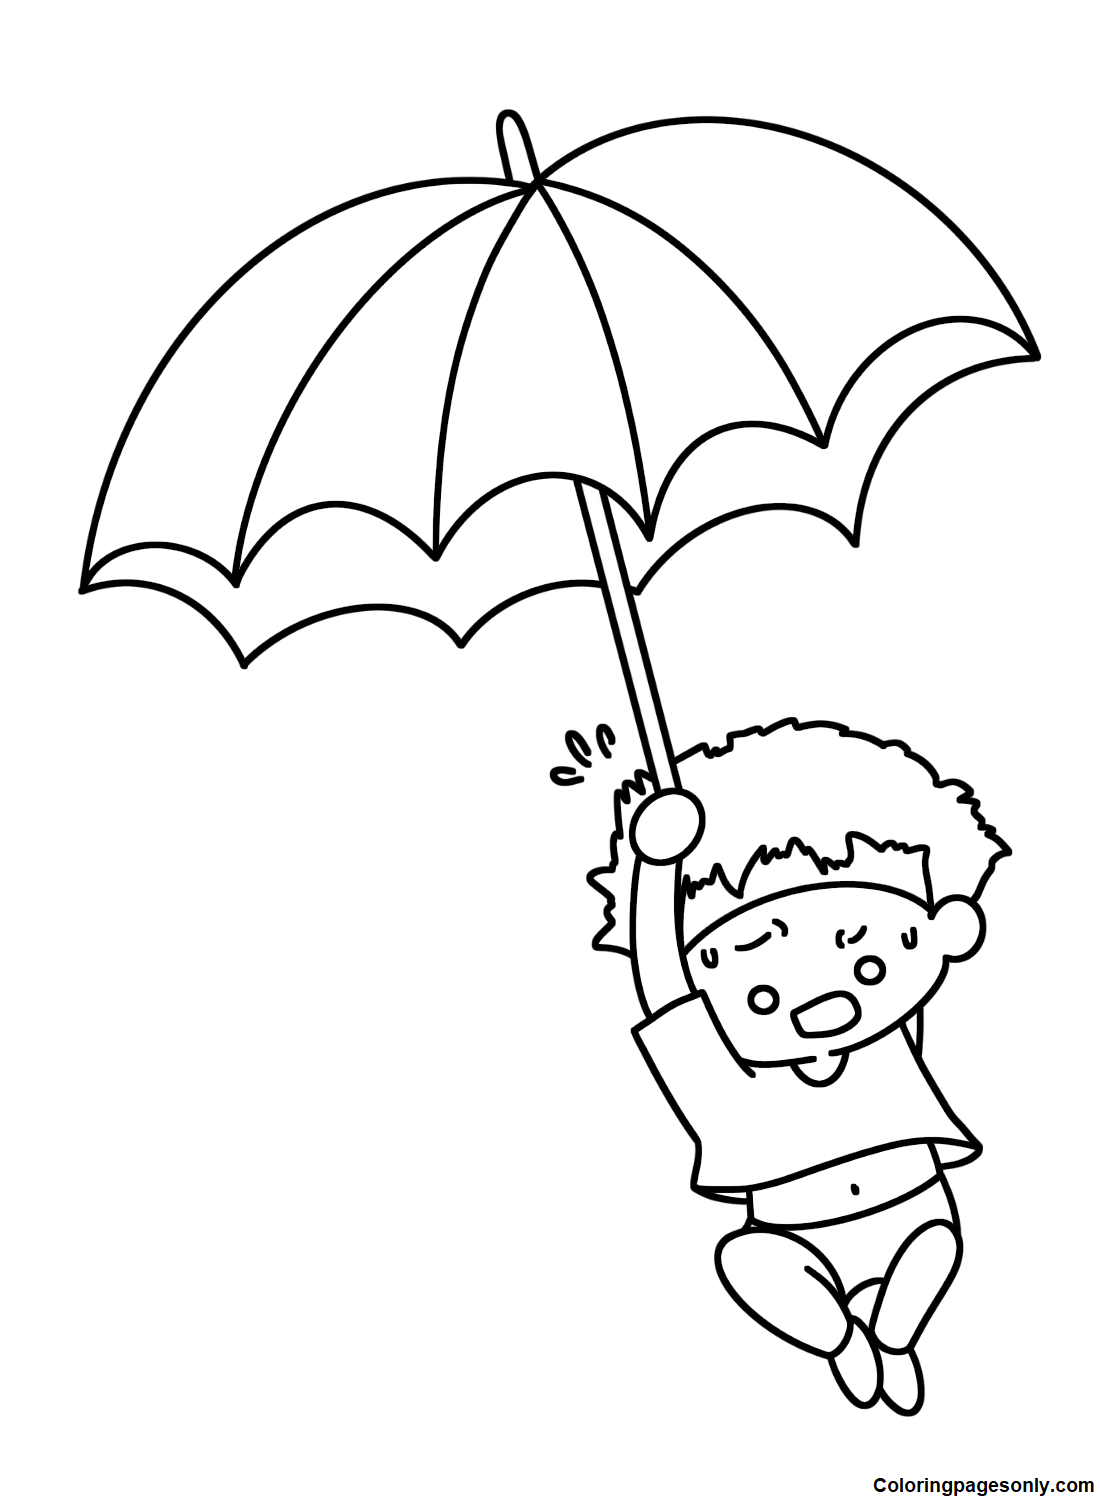 Boy holding an Umbrella Coloring Page